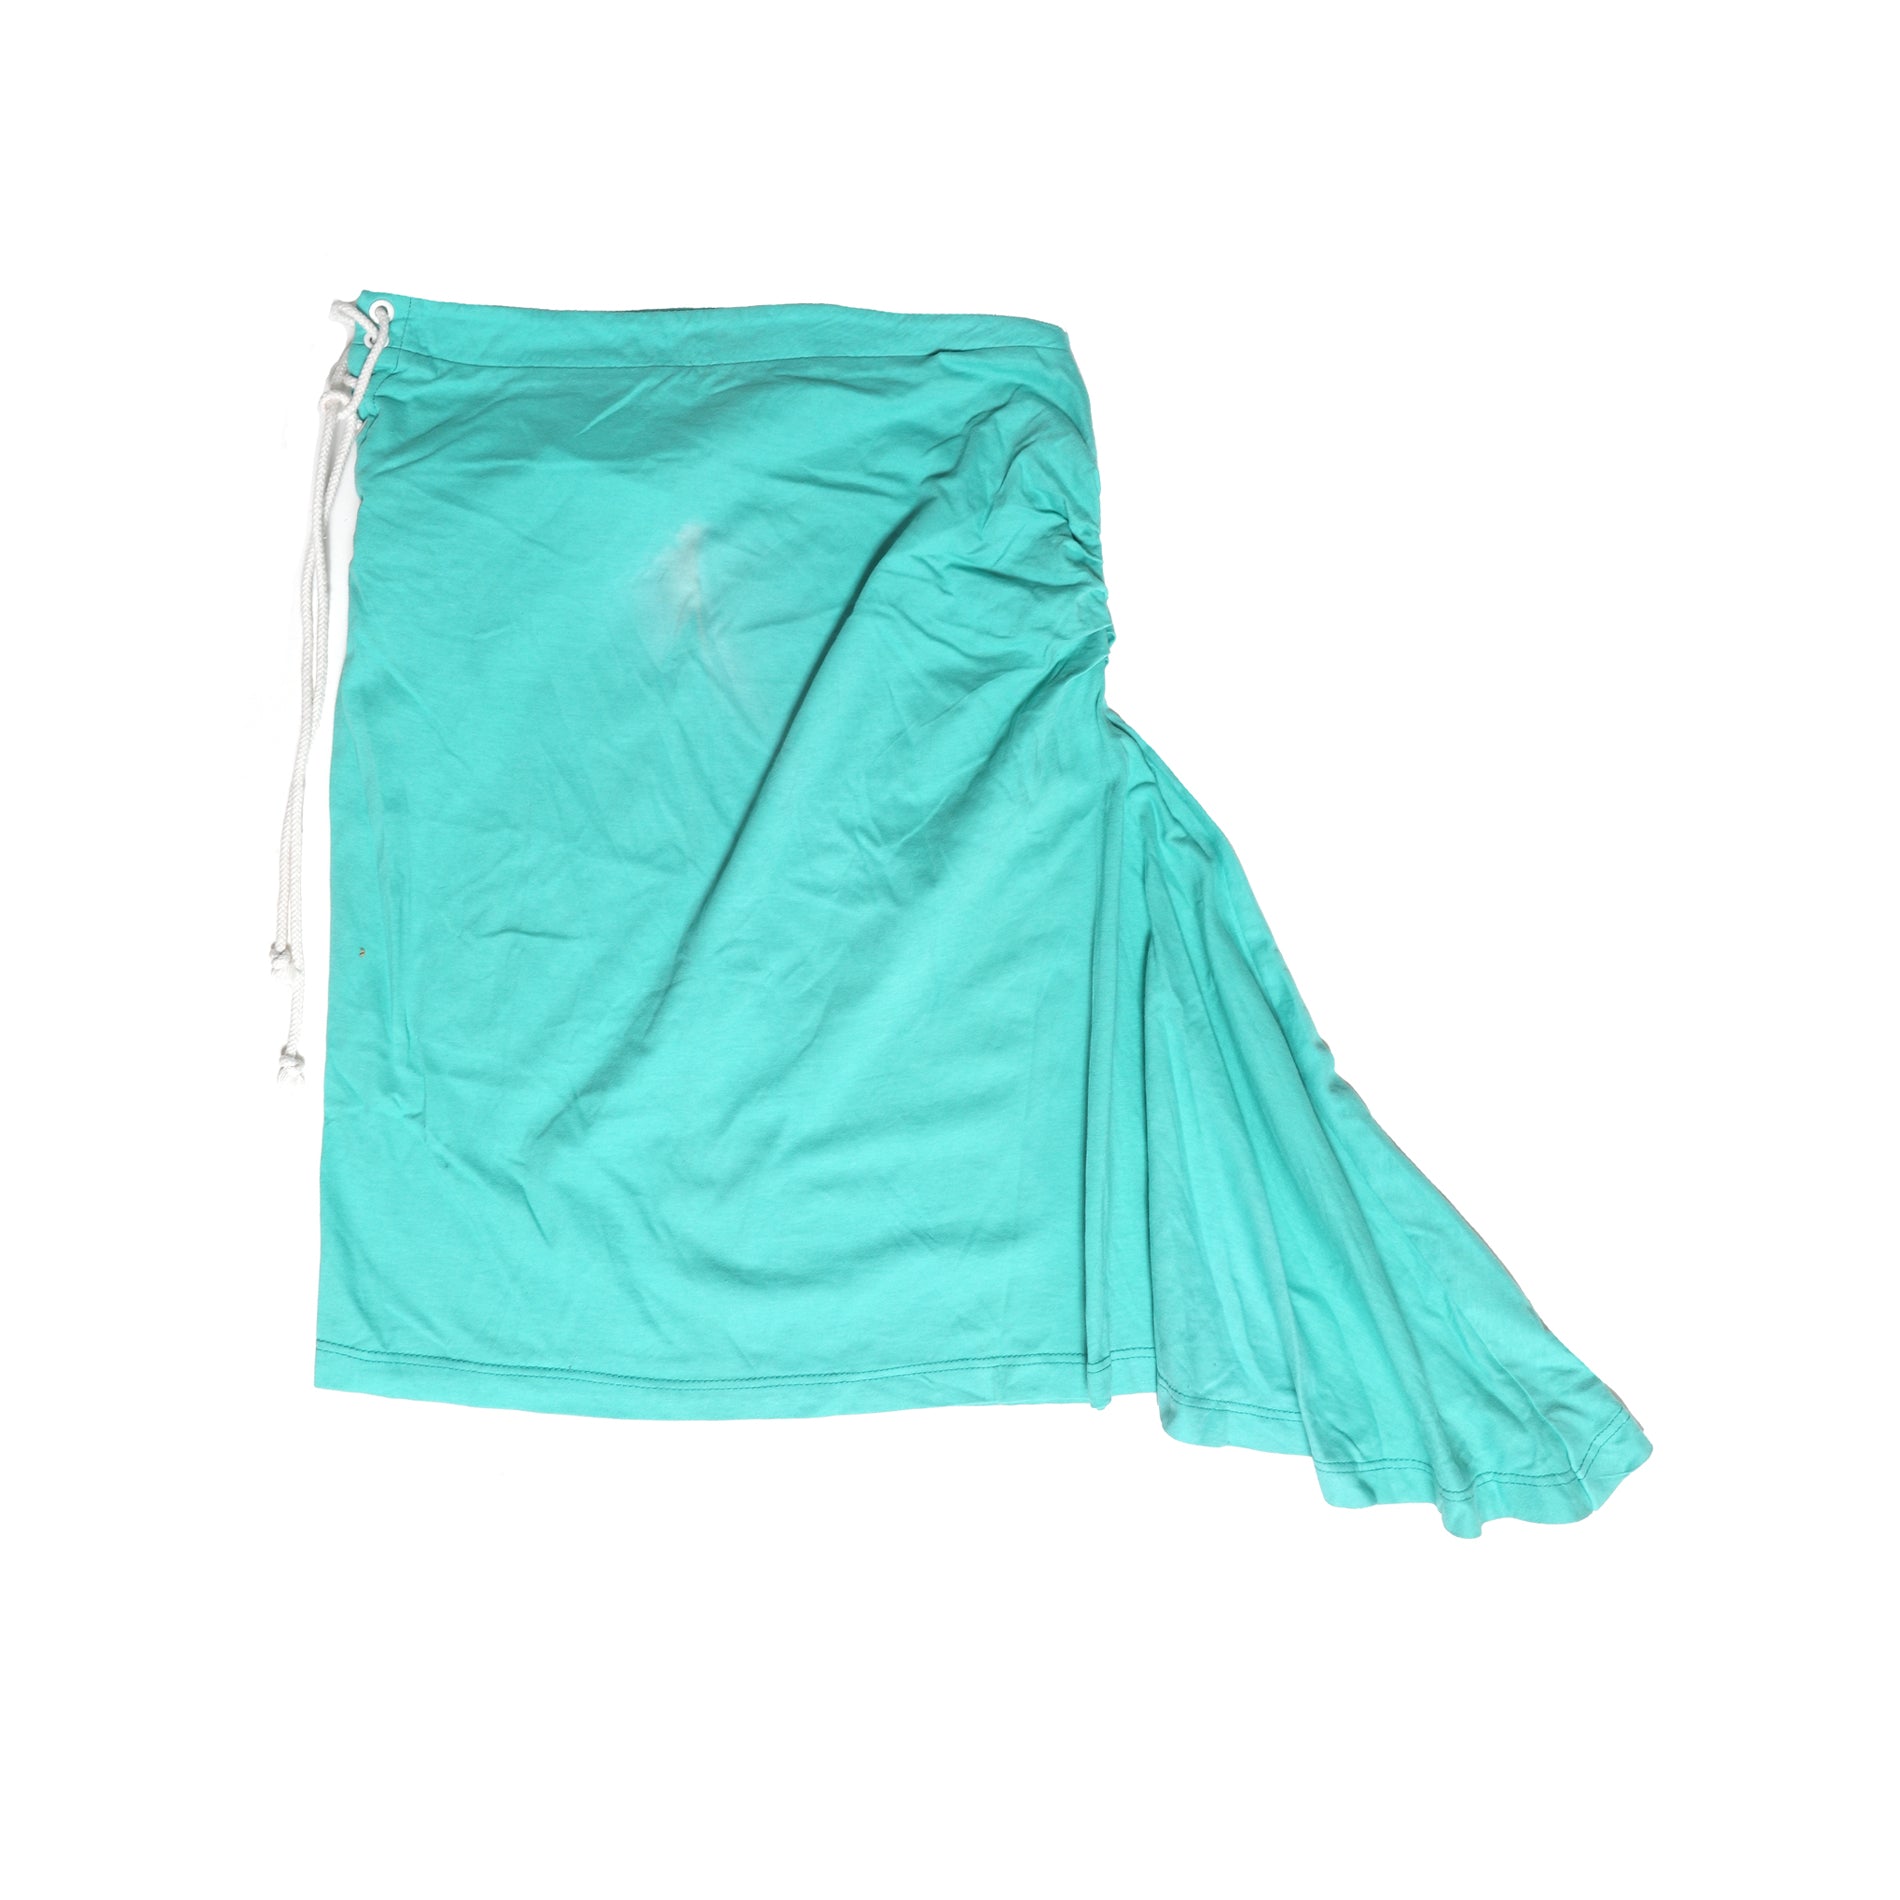 Thierry Mugler 90s Turquoise Lace-Up Skirt